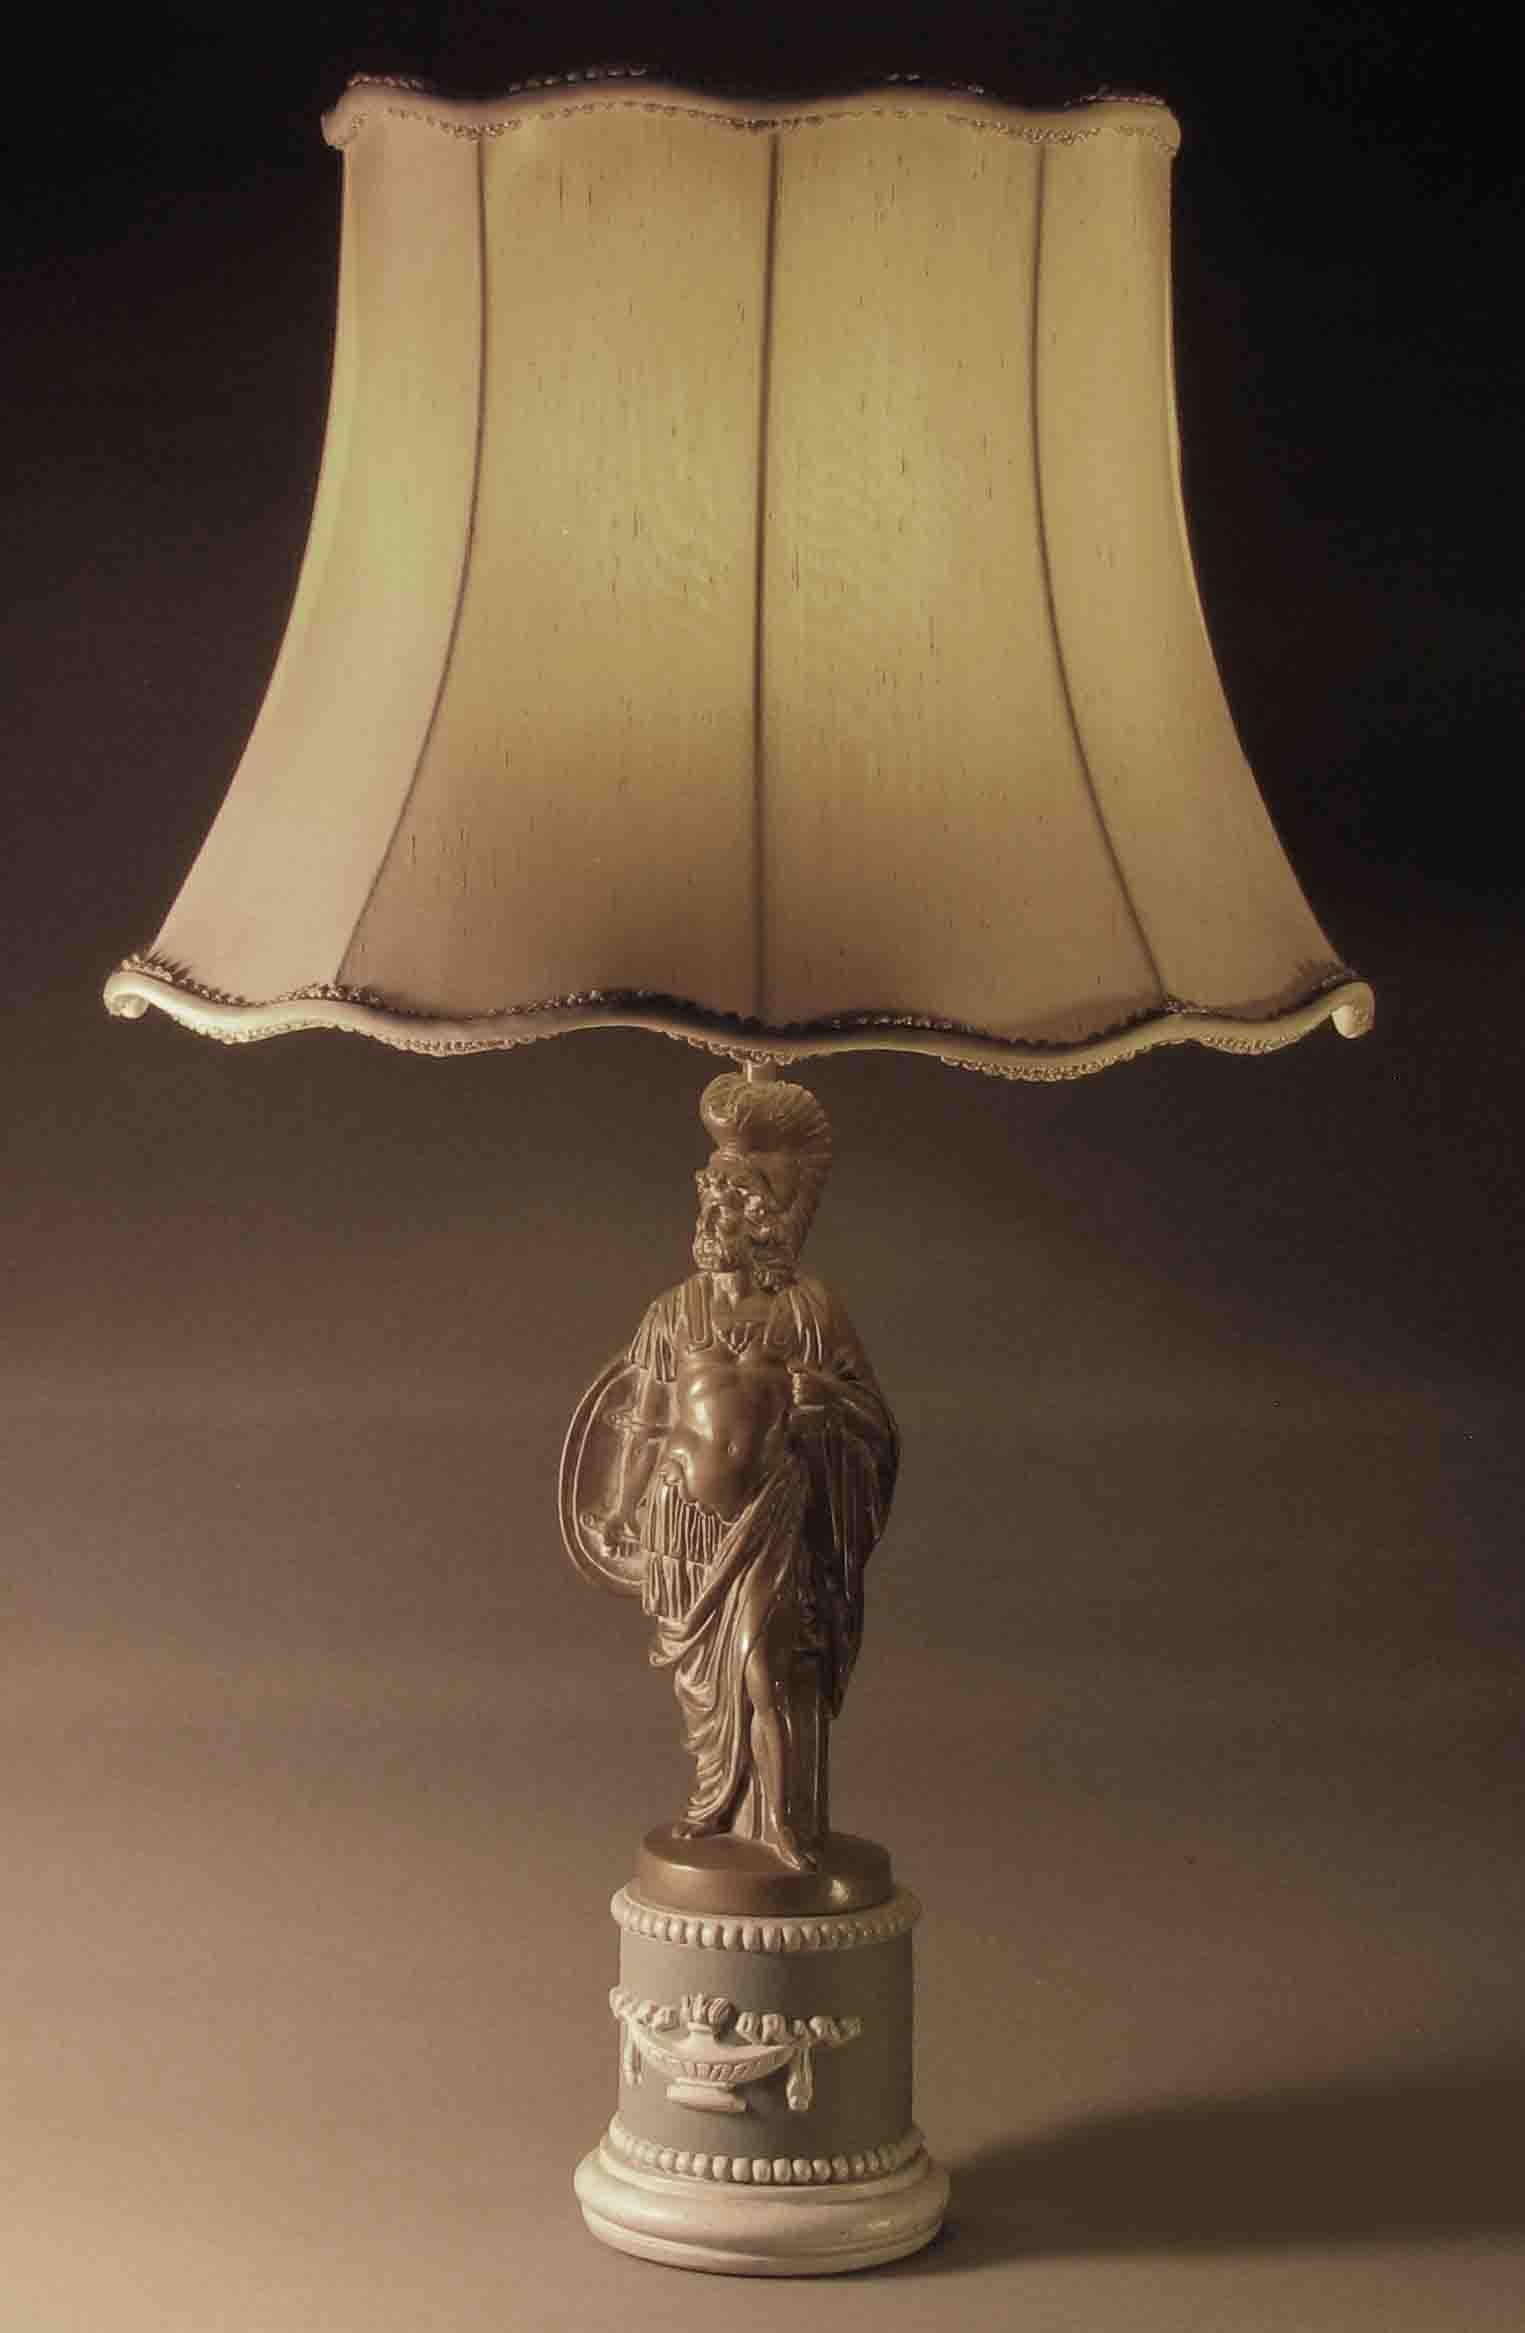 Pair of Patinated Plaster Neoclassical Figural Table Lamps by Sculptureline N.Y. For Sale 1